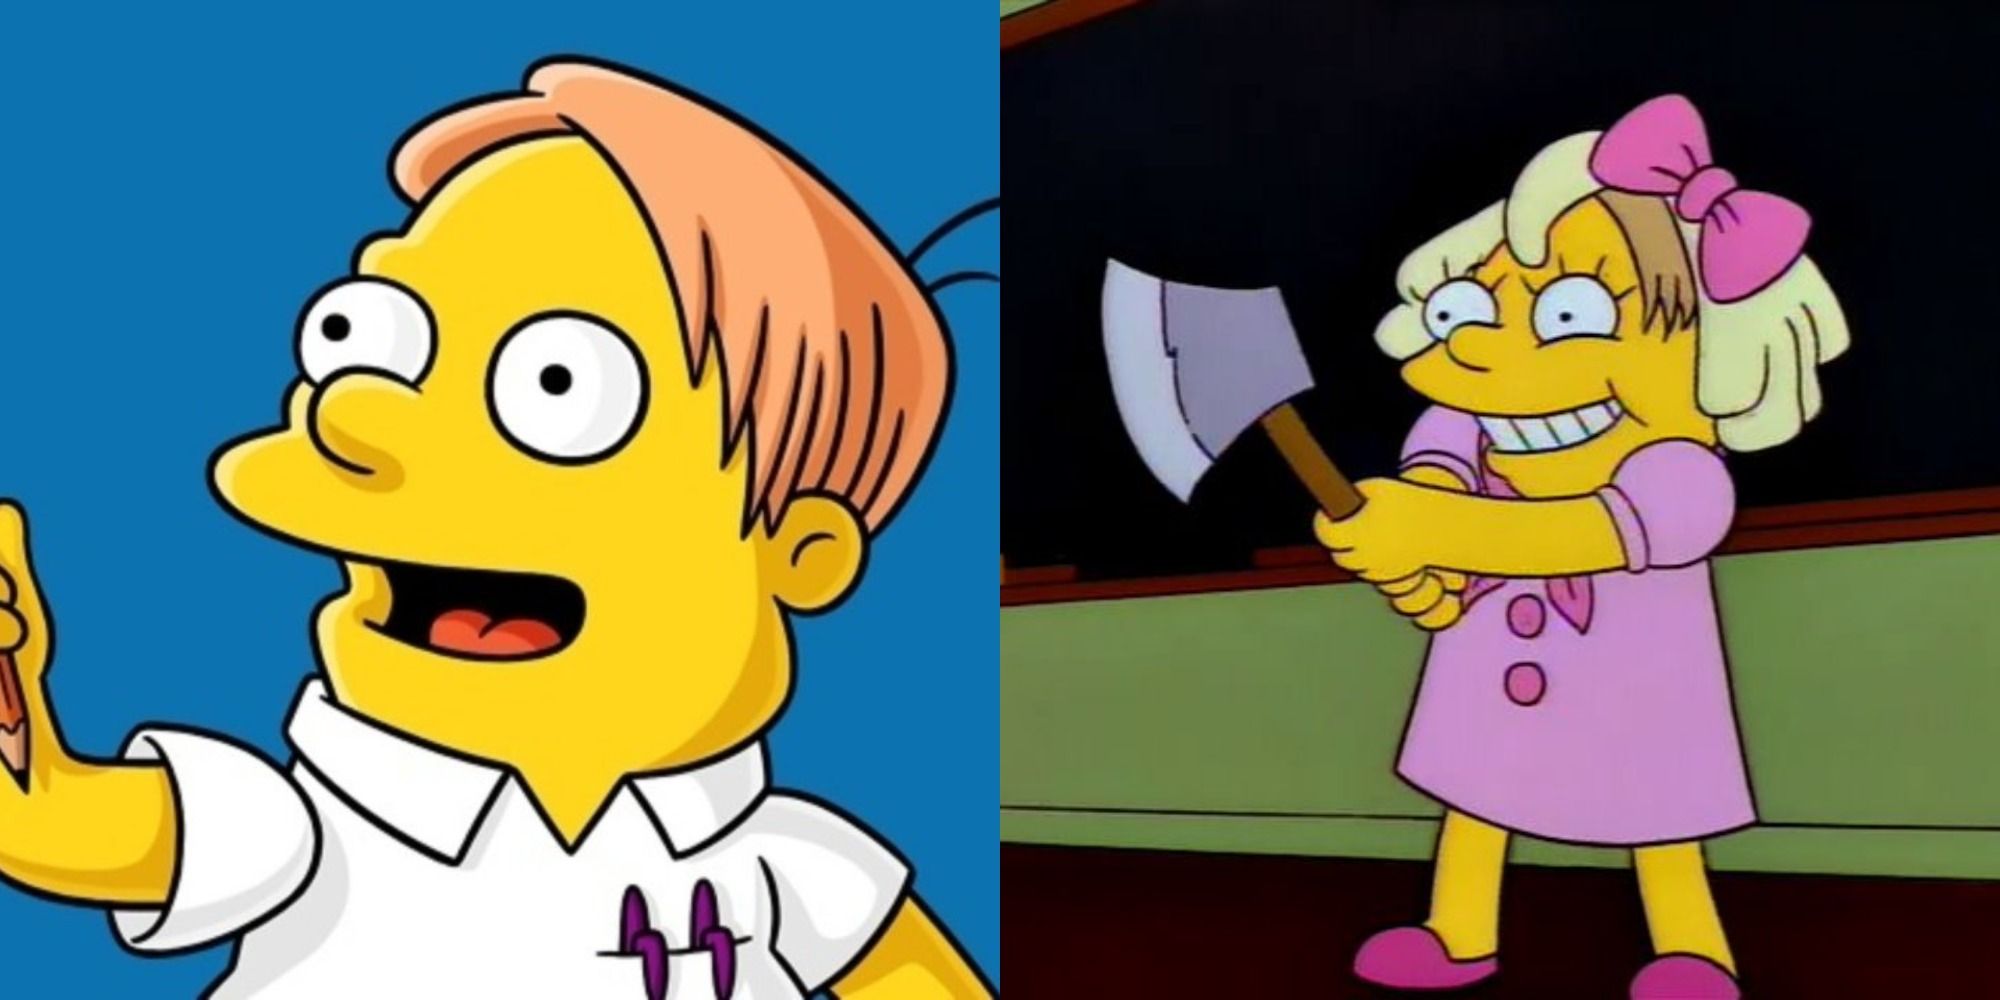 Split image showing Martin smiling and dressed as Lizzie Borden in The Simpsons